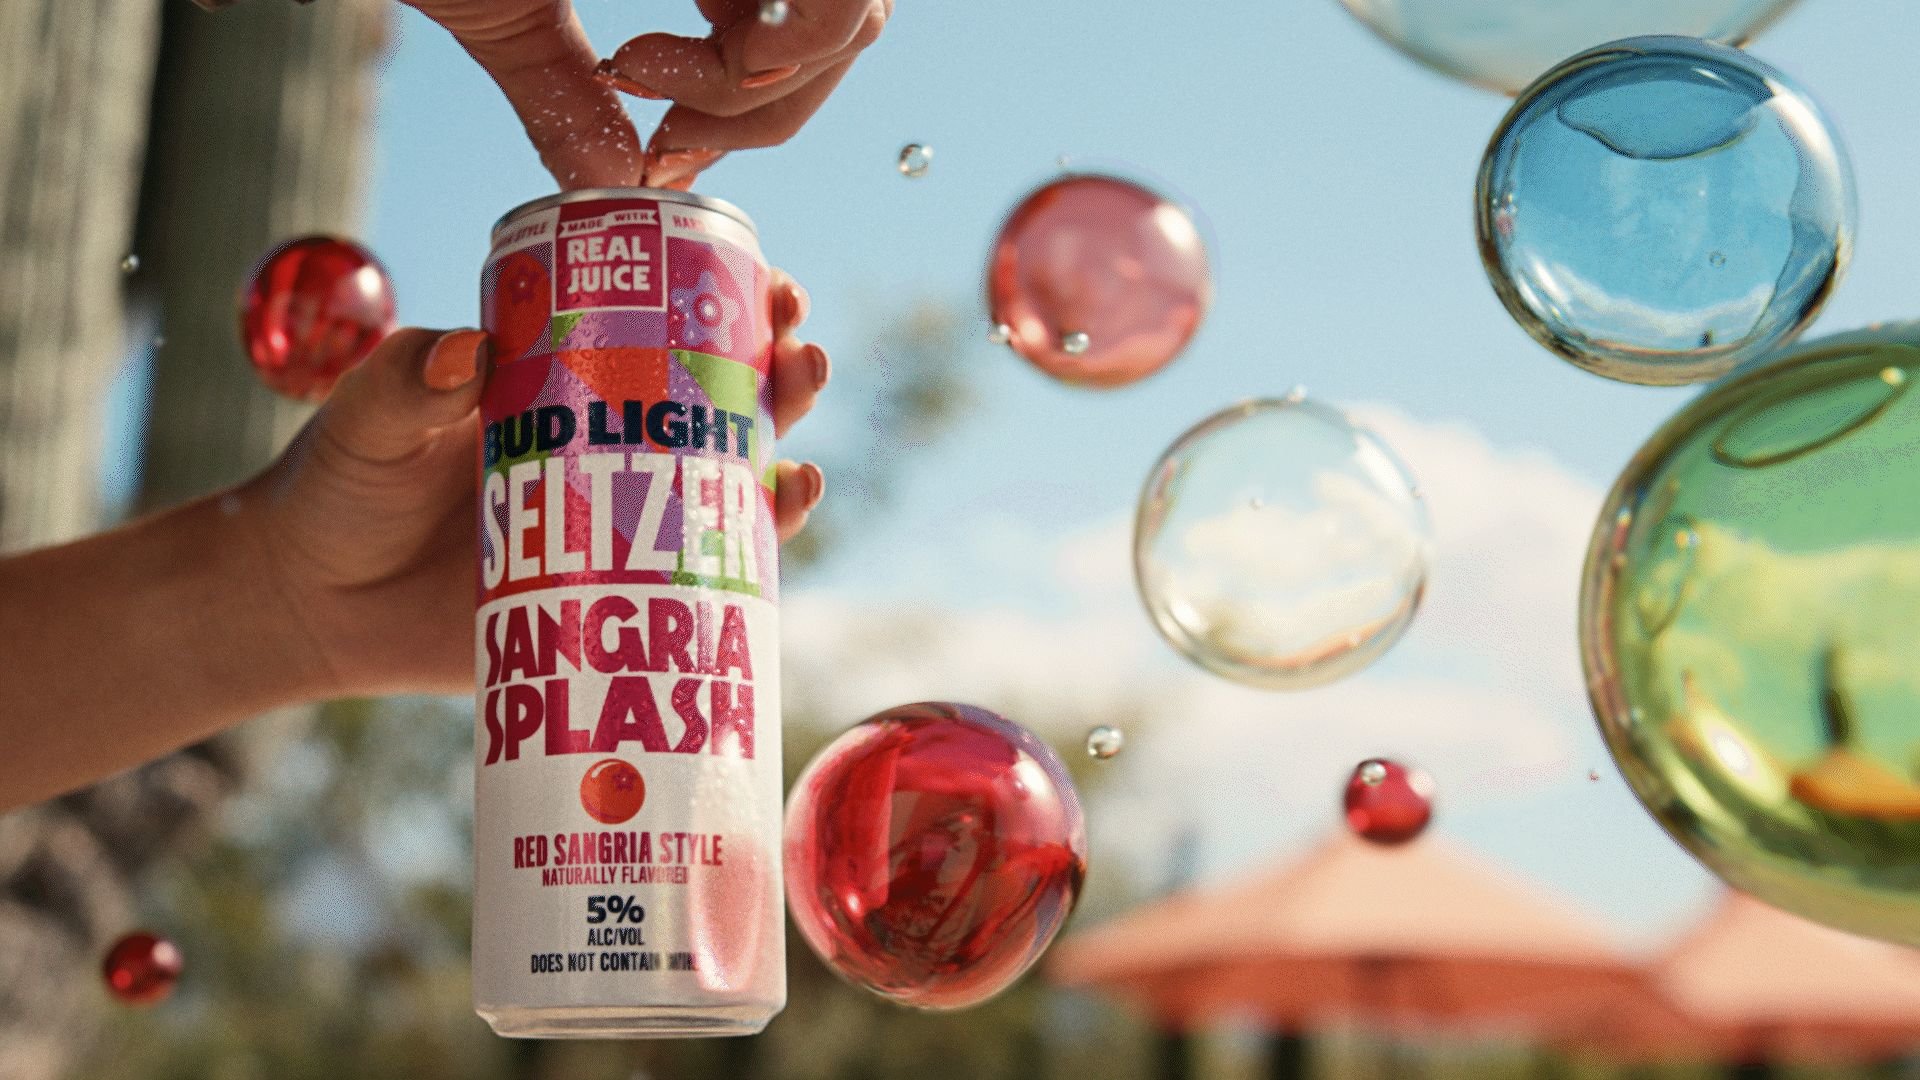 Bud Light Seltzer Out to Prove It’s ‘100% Hard Seltzer, 0% Beer.’ with New Campaign and ‘MISCONCEPTIONS’, the Brand’s First-Ever Party Card Game